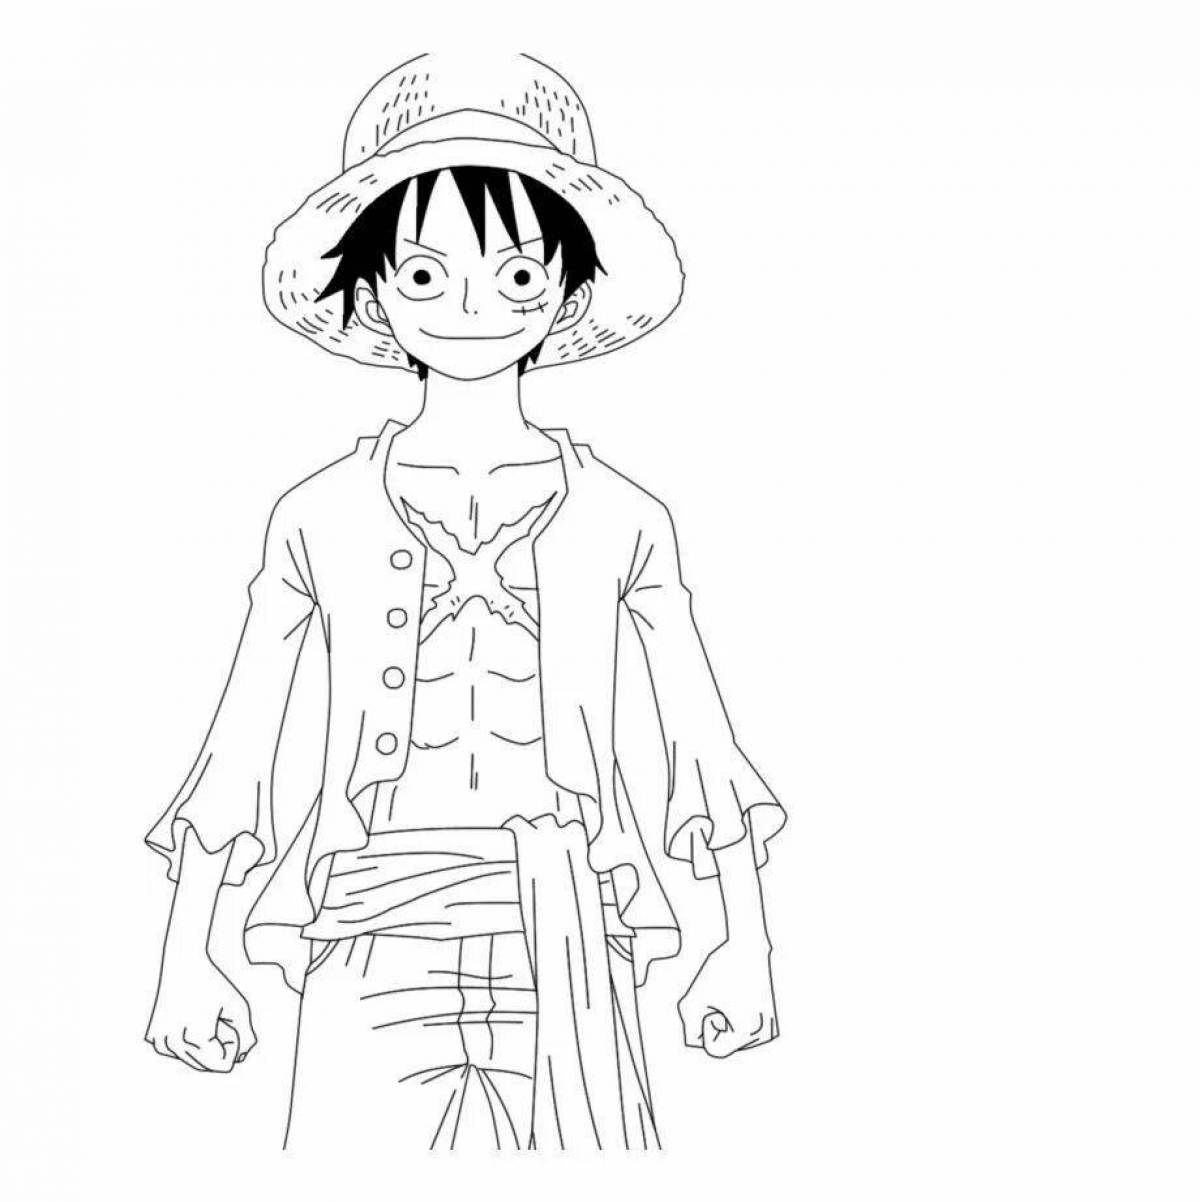 Jovial luffy one piece coloring page